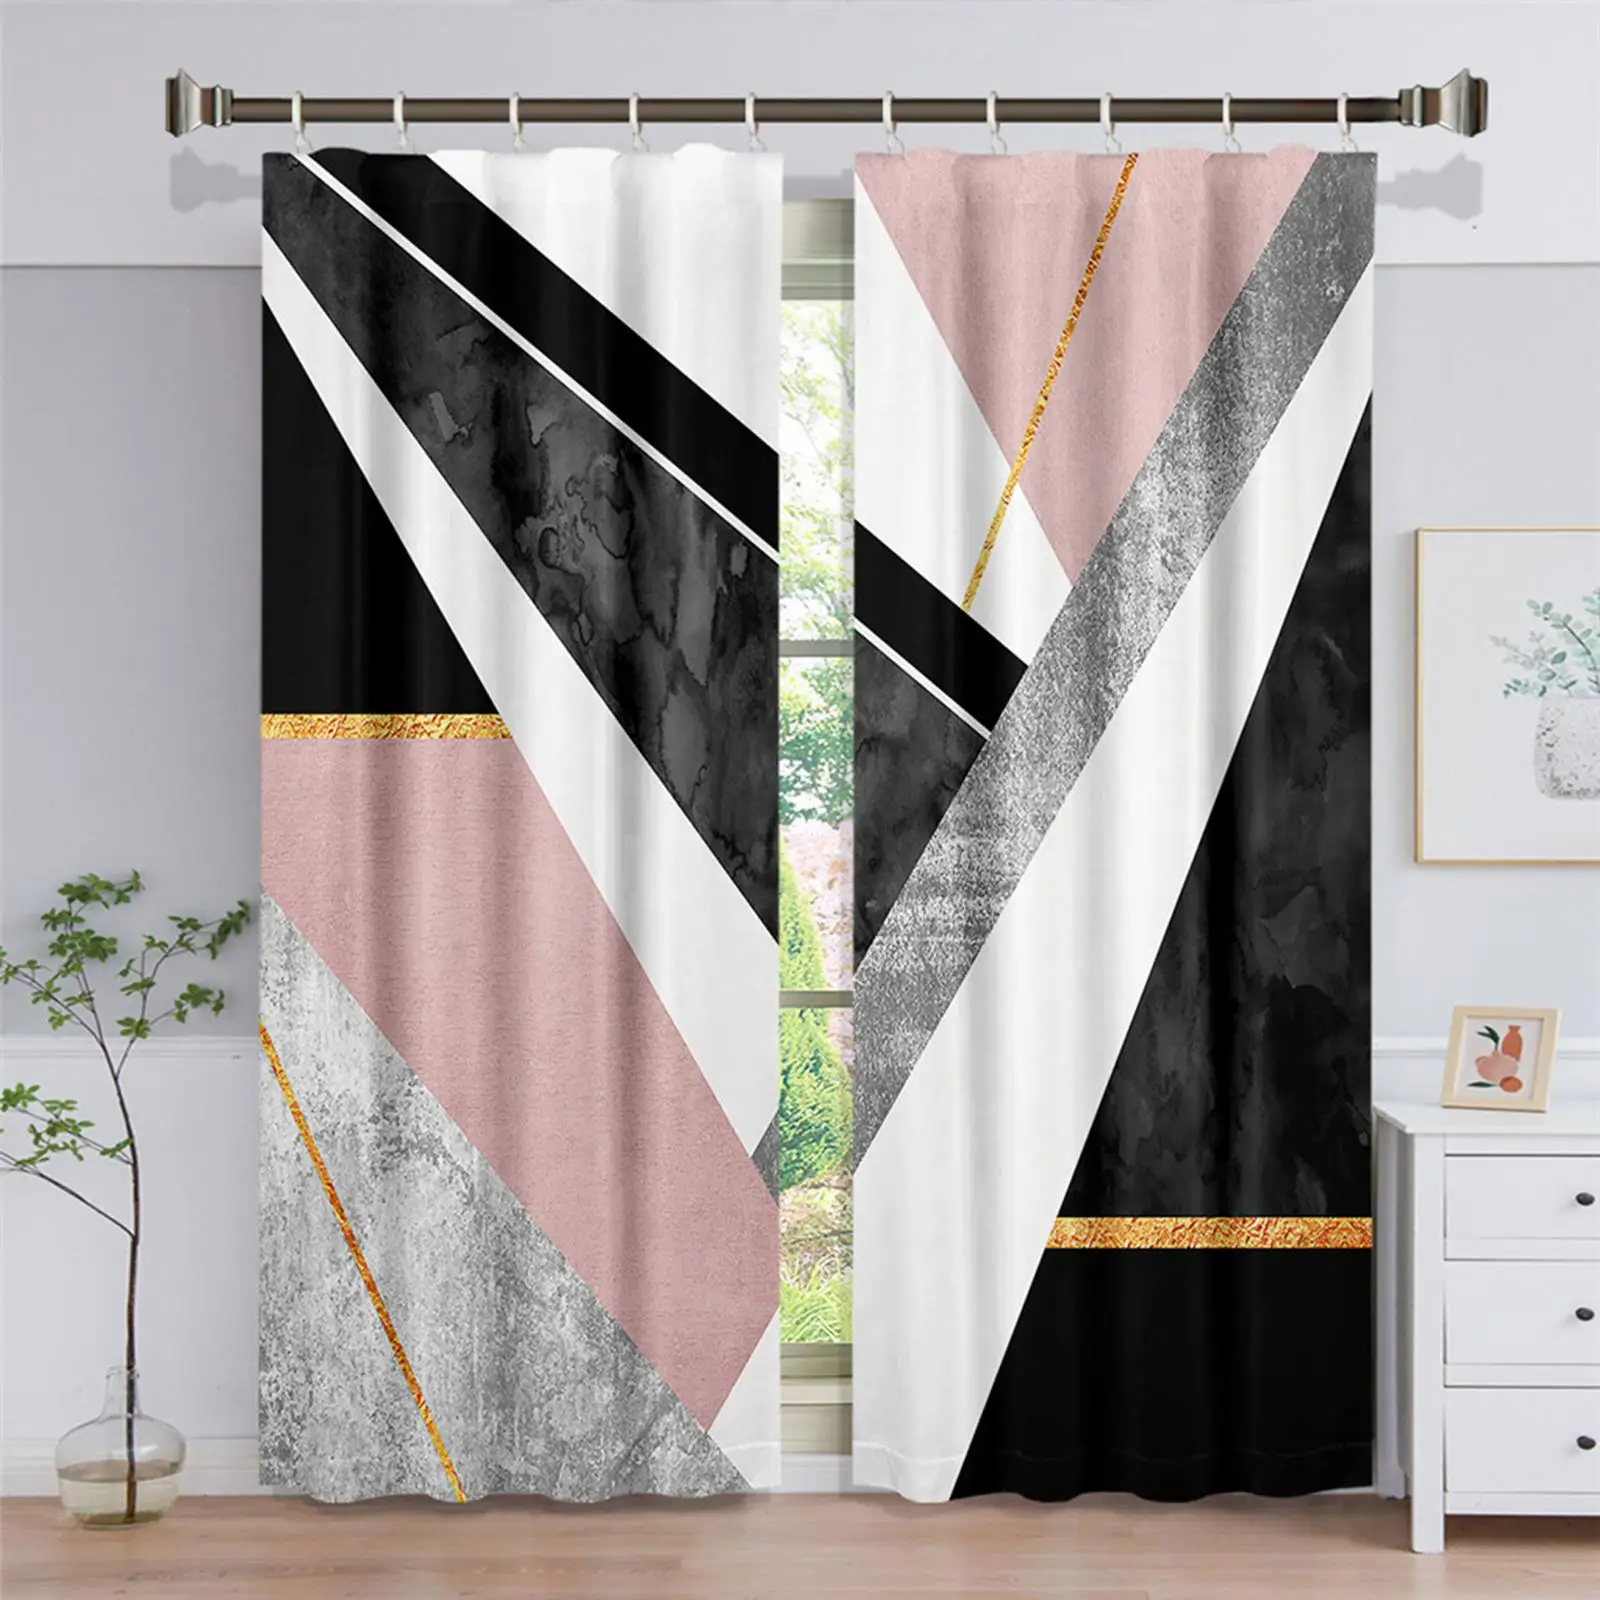 Polyester Fabric Bathroom Shower Curtains Window Curtain for Kitchen Hotel